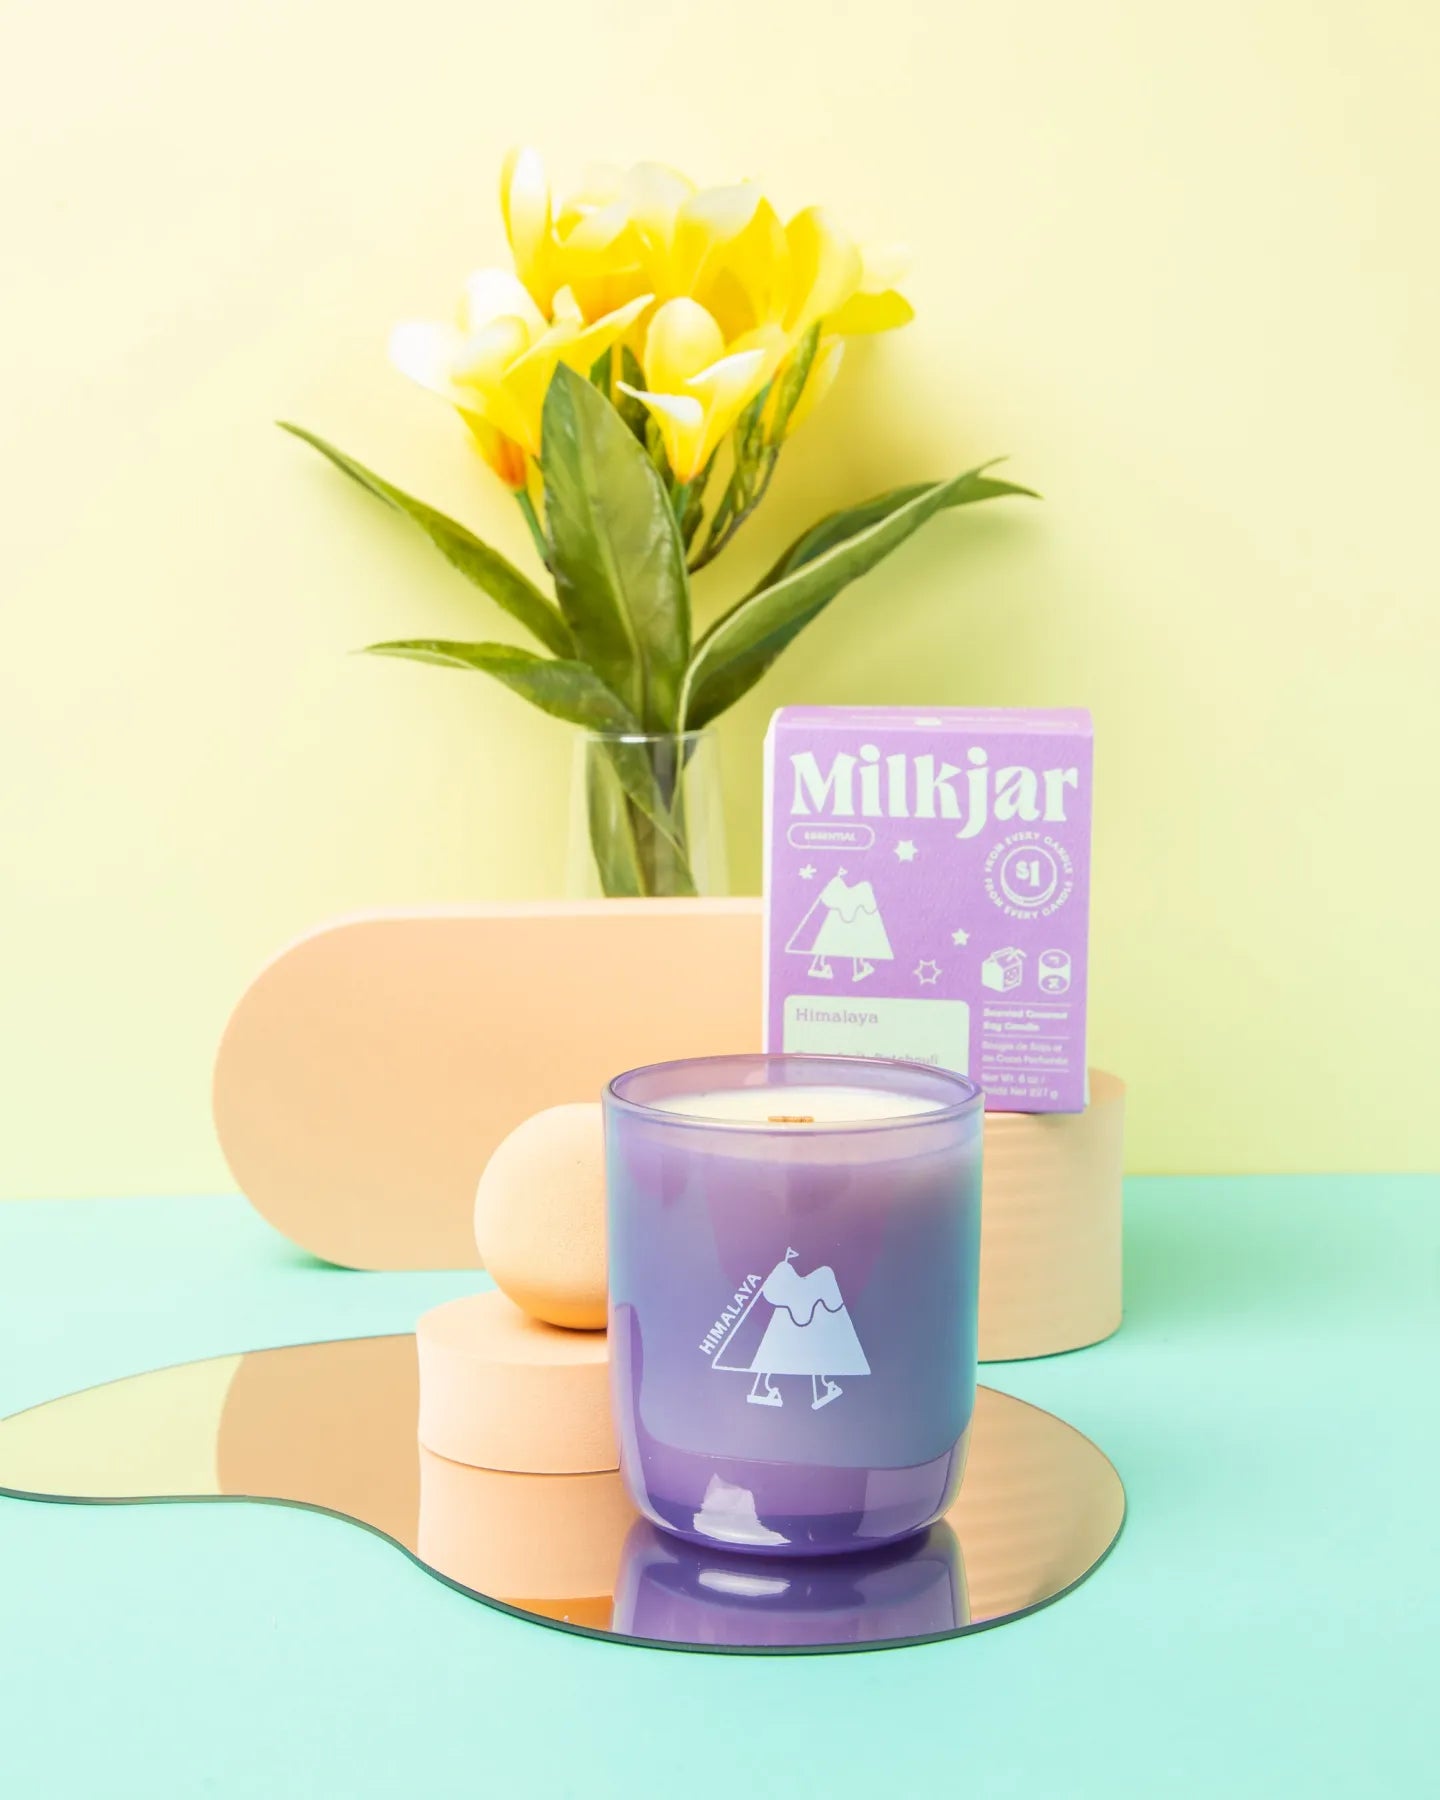 Milk Jar Candle Co. Himalaya Scented Candle - Osmology Scented Candles & Home Fragrance